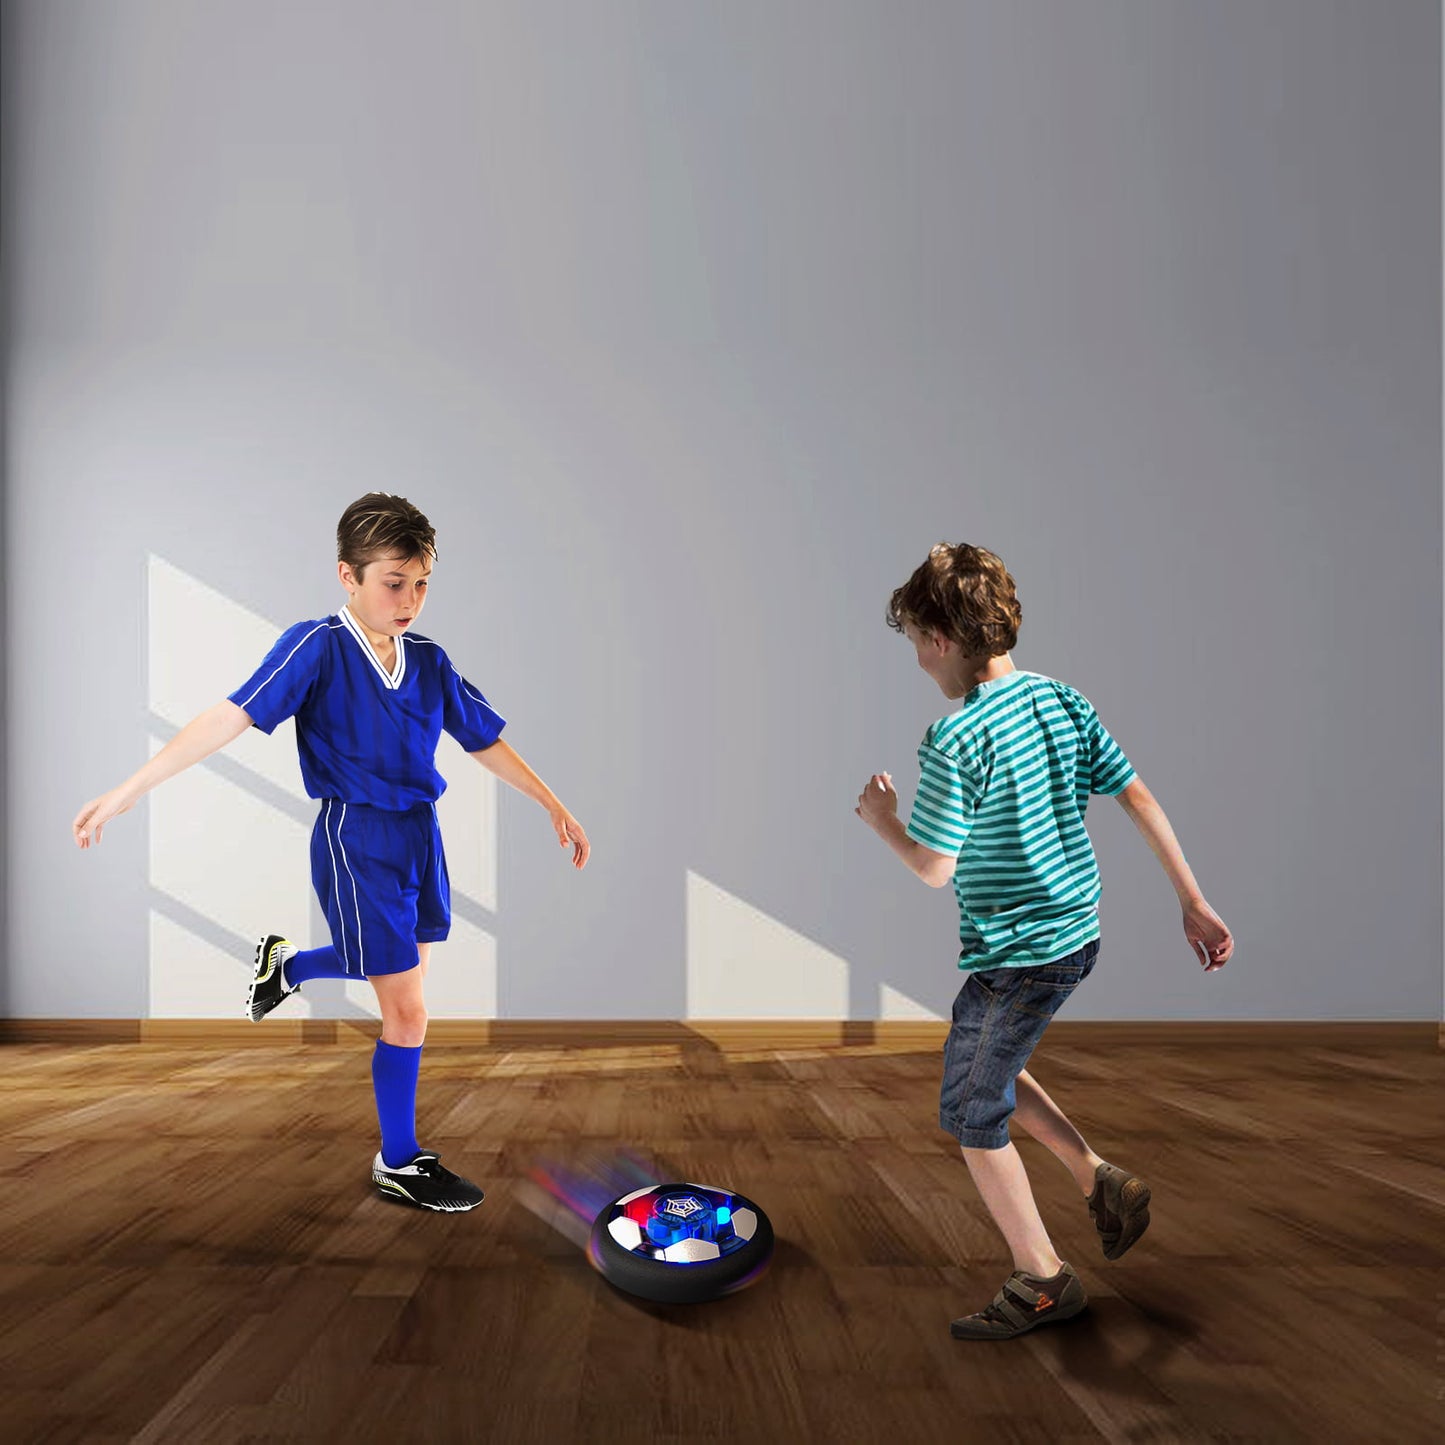 Hover Soccer Ball Toys, Rechargeable Hover Ball w/ Led Lights Indoor/Outdoor Games for Kids Ages 3 4 5 6 7 8-12